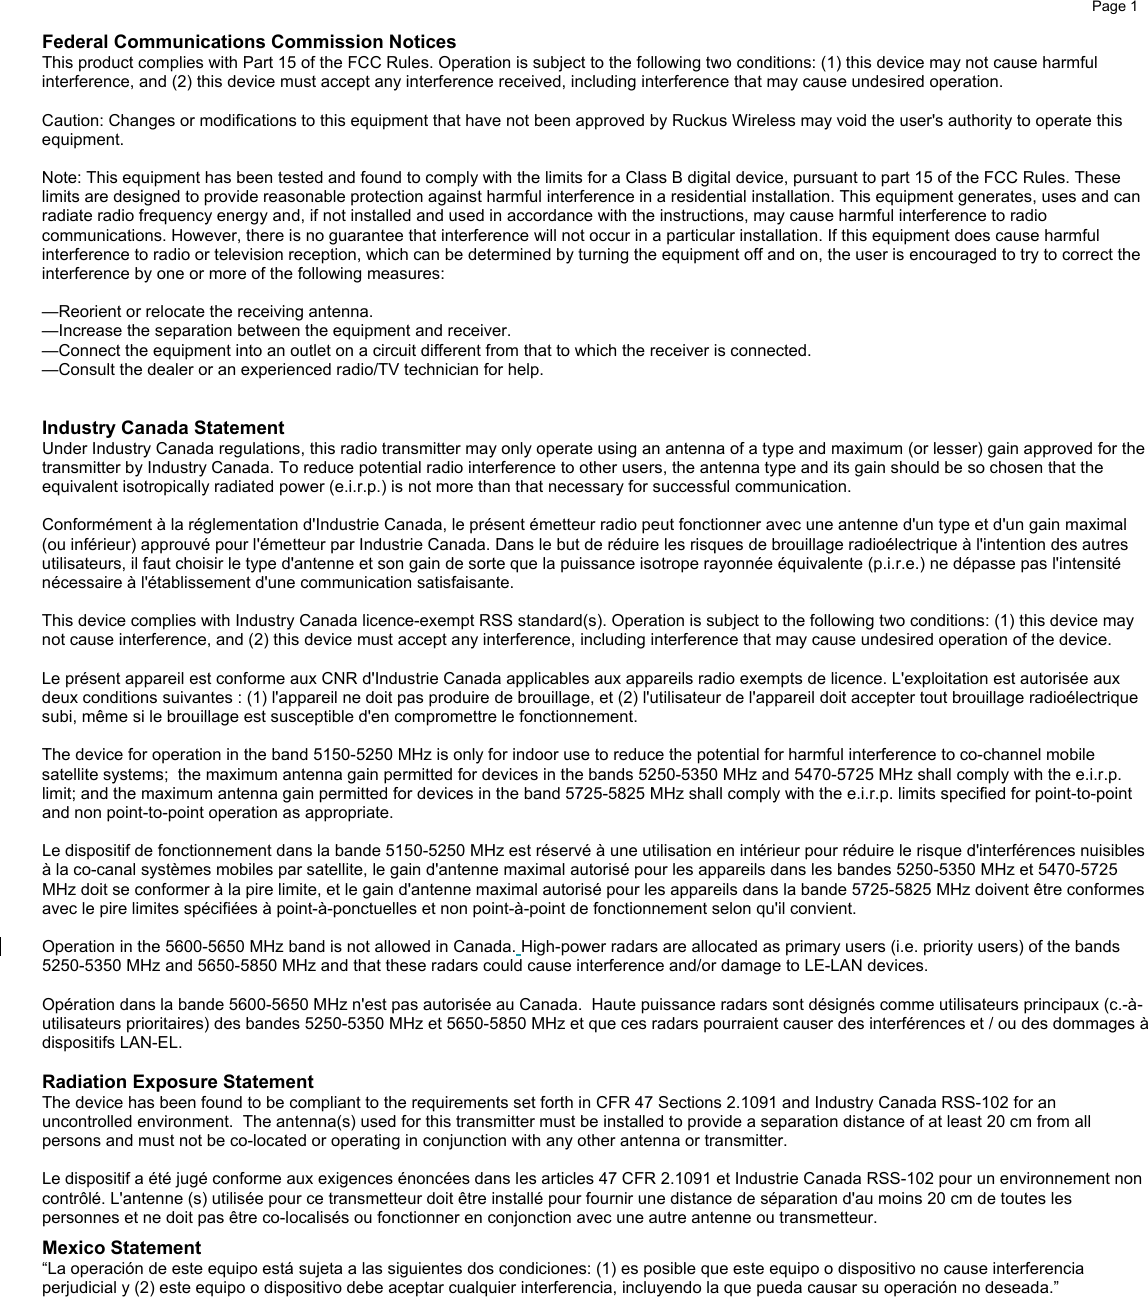     Page 1      Federal Communications Commission Notices This product complies with Part 15 of the FCC Rules. Operation is subject to the following two conditions: (1) this device may not cause harmful interference, and (2) this device must accept any interference received, including interference that may cause undesired operation.  Caution: Changes or modifications to this equipment that have not been approved by Ruckus Wireless may void the user&apos;s authority to operate this equipment.  Note: This equipment has been tested and found to comply with the limits for a Class B digital device, pursuant to part 15 of the FCC Rules. These limits are designed to provide reasonable protection against harmful interference in a residential installation. This equipment generates, uses and can radiate radio frequency energy and, if not installed and used in accordance with the instructions, may cause harmful interference to radio communications. However, there is no guarantee that interference will not occur in a particular installation. If this equipment does cause harmful interference to radio or television reception, which can be determined by turning the equipment off and on, the user is encouraged to try to correct the interference by one or more of the following measures:  —Reorient or relocate the receiving antenna. —Increase the separation between the equipment and receiver. —Connect the equipment into an outlet on a circuit different from that to which the receiver is connected. —Consult the dealer or an experienced radio/TV technician for help.   Industry Canada Statement Under Industry Canada regulations, this radio transmitter may only operate using an antenna of a type and maximum (or lesser) gain approved for the transmitter by Industry Canada. To reduce potential radio interference to other users, the antenna type and its gain should be so chosen that the equivalent isotropically radiated power (e.i.r.p.) is not more than that necessary for successful communication.    Conformément à la réglementation d&apos;Industrie Canada, le présent émetteur radio peut fonctionner avec une antenne d&apos;un type et d&apos;un gain maximal (ou inférieur) approuvé pour l&apos;émetteur par Industrie Canada. Dans le but de réduire les risques de brouillage radioélectrique à l&apos;intention des autres utilisateurs, il faut choisir le type d&apos;antenne et son gain de sorte que la puissance isotrope rayonnée équivalente (p.i.r.e.) ne dépasse pas l&apos;intensité nécessaire à l&apos;établissement d&apos;une communication satisfaisante.  This device complies with Industry Canada licence-exempt RSS standard(s). Operation is subject to the following two conditions: (1) this device may not cause interference, and (2) this device must accept any interference, including interference that may cause undesired operation of the device.   Le présent appareil est conforme aux CNR d&apos;Industrie Canada applicables aux appareils radio exempts de licence. L&apos;exploitation est autorisée aux deux conditions suivantes : (1) l&apos;appareil ne doit pas produire de brouillage, et (2) l&apos;utilisateur de l&apos;appareil doit accepter tout brouillage radioélectrique subi, même si le brouillage est susceptible d&apos;en compromettre le fonctionnement.  The device for operation in the band 5150-5250 MHz is only for indoor use to reduce the potential for harmful interference to co-channel mobile satellite systems;  the maximum antenna gain permitted for devices in the bands 5250-5350 MHz and 5470-5725 MHz shall comply with the e.i.r.p. limit; and the maximum antenna gain permitted for devices in the band 5725-5825 MHz shall comply with the e.i.r.p. limits specified for point-to-point and non point-to-point operation as appropriate.    Le dispositif de fonctionnement dans la bande 5150-5250 MHz est réservé à une utilisation en intérieur pour réduire le risque d&apos;interférences nuisibles à la co-canal systèmes mobiles par satellite, le gain d&apos;antenne maximal autorisé pour les appareils dans les bandes 5250-5350 MHz et 5470-5725 MHz doit se conformer à la pire limite, et le gain d&apos;antenne maximal autorisé pour les appareils dans la bande 5725-5825 MHz doivent être conformes avec le pire limites spécifiées à point-à-ponctuelles et non point-à-point de fonctionnement selon qu&apos;il convient.  Operation in the 5600-5650 MHz band is not allowed in Canada. High-power radars are allocated as primary users (i.e. priority users) of the bands 5250-5350 MHz and 5650-5850 MHz and that these radars could cause interference and/or damage to LE-LAN devices.  Opération dans la bande 5600-5650 MHz n&apos;est pas autorisée au Canada.  Haute puissance radars sont désignés comme utilisateurs principaux (c.-à-utilisateurs prioritaires) des bandes 5250-5350 MHz et 5650-5850 MHz et que ces radars pourraient causer des interférences et / ou des dommages à dispositifs LAN-EL.  Radiation Exposure Statement The device has been found to be compliant to the requirements set forth in CFR 47 Sections 2.1091 and Industry Canada RSS-102 for an uncontrolled environment.  The antenna(s) used for this transmitter must be installed to provide a separation distance of at least 20 cm from all persons and must not be co-located or operating in conjunction with any other antenna or transmitter.   Le dispositif a été jugé conforme aux exigences énoncées dans les articles 47 CFR 2.1091 et Industrie Canada RSS-102 pour un environnement non contrôlé. L&apos;antenne (s) utilisée pour ce transmetteur doit être installé pour fournir une distance de séparation d&apos;au moins 20 cm de toutes les personnes et ne doit pas être co-localisés ou fonctionner en conjonction avec une autre antenne ou transmetteur. Mexico Statement “La operación de este equipo está sujeta a las siguientes dos condiciones: (1) es posible que este equipo o dispositivo no cause interferencia perjudicial y (2) este equipo o dispositivo debe aceptar cualquier interferencia, incluyendo la que pueda causar su operación no deseada.” 